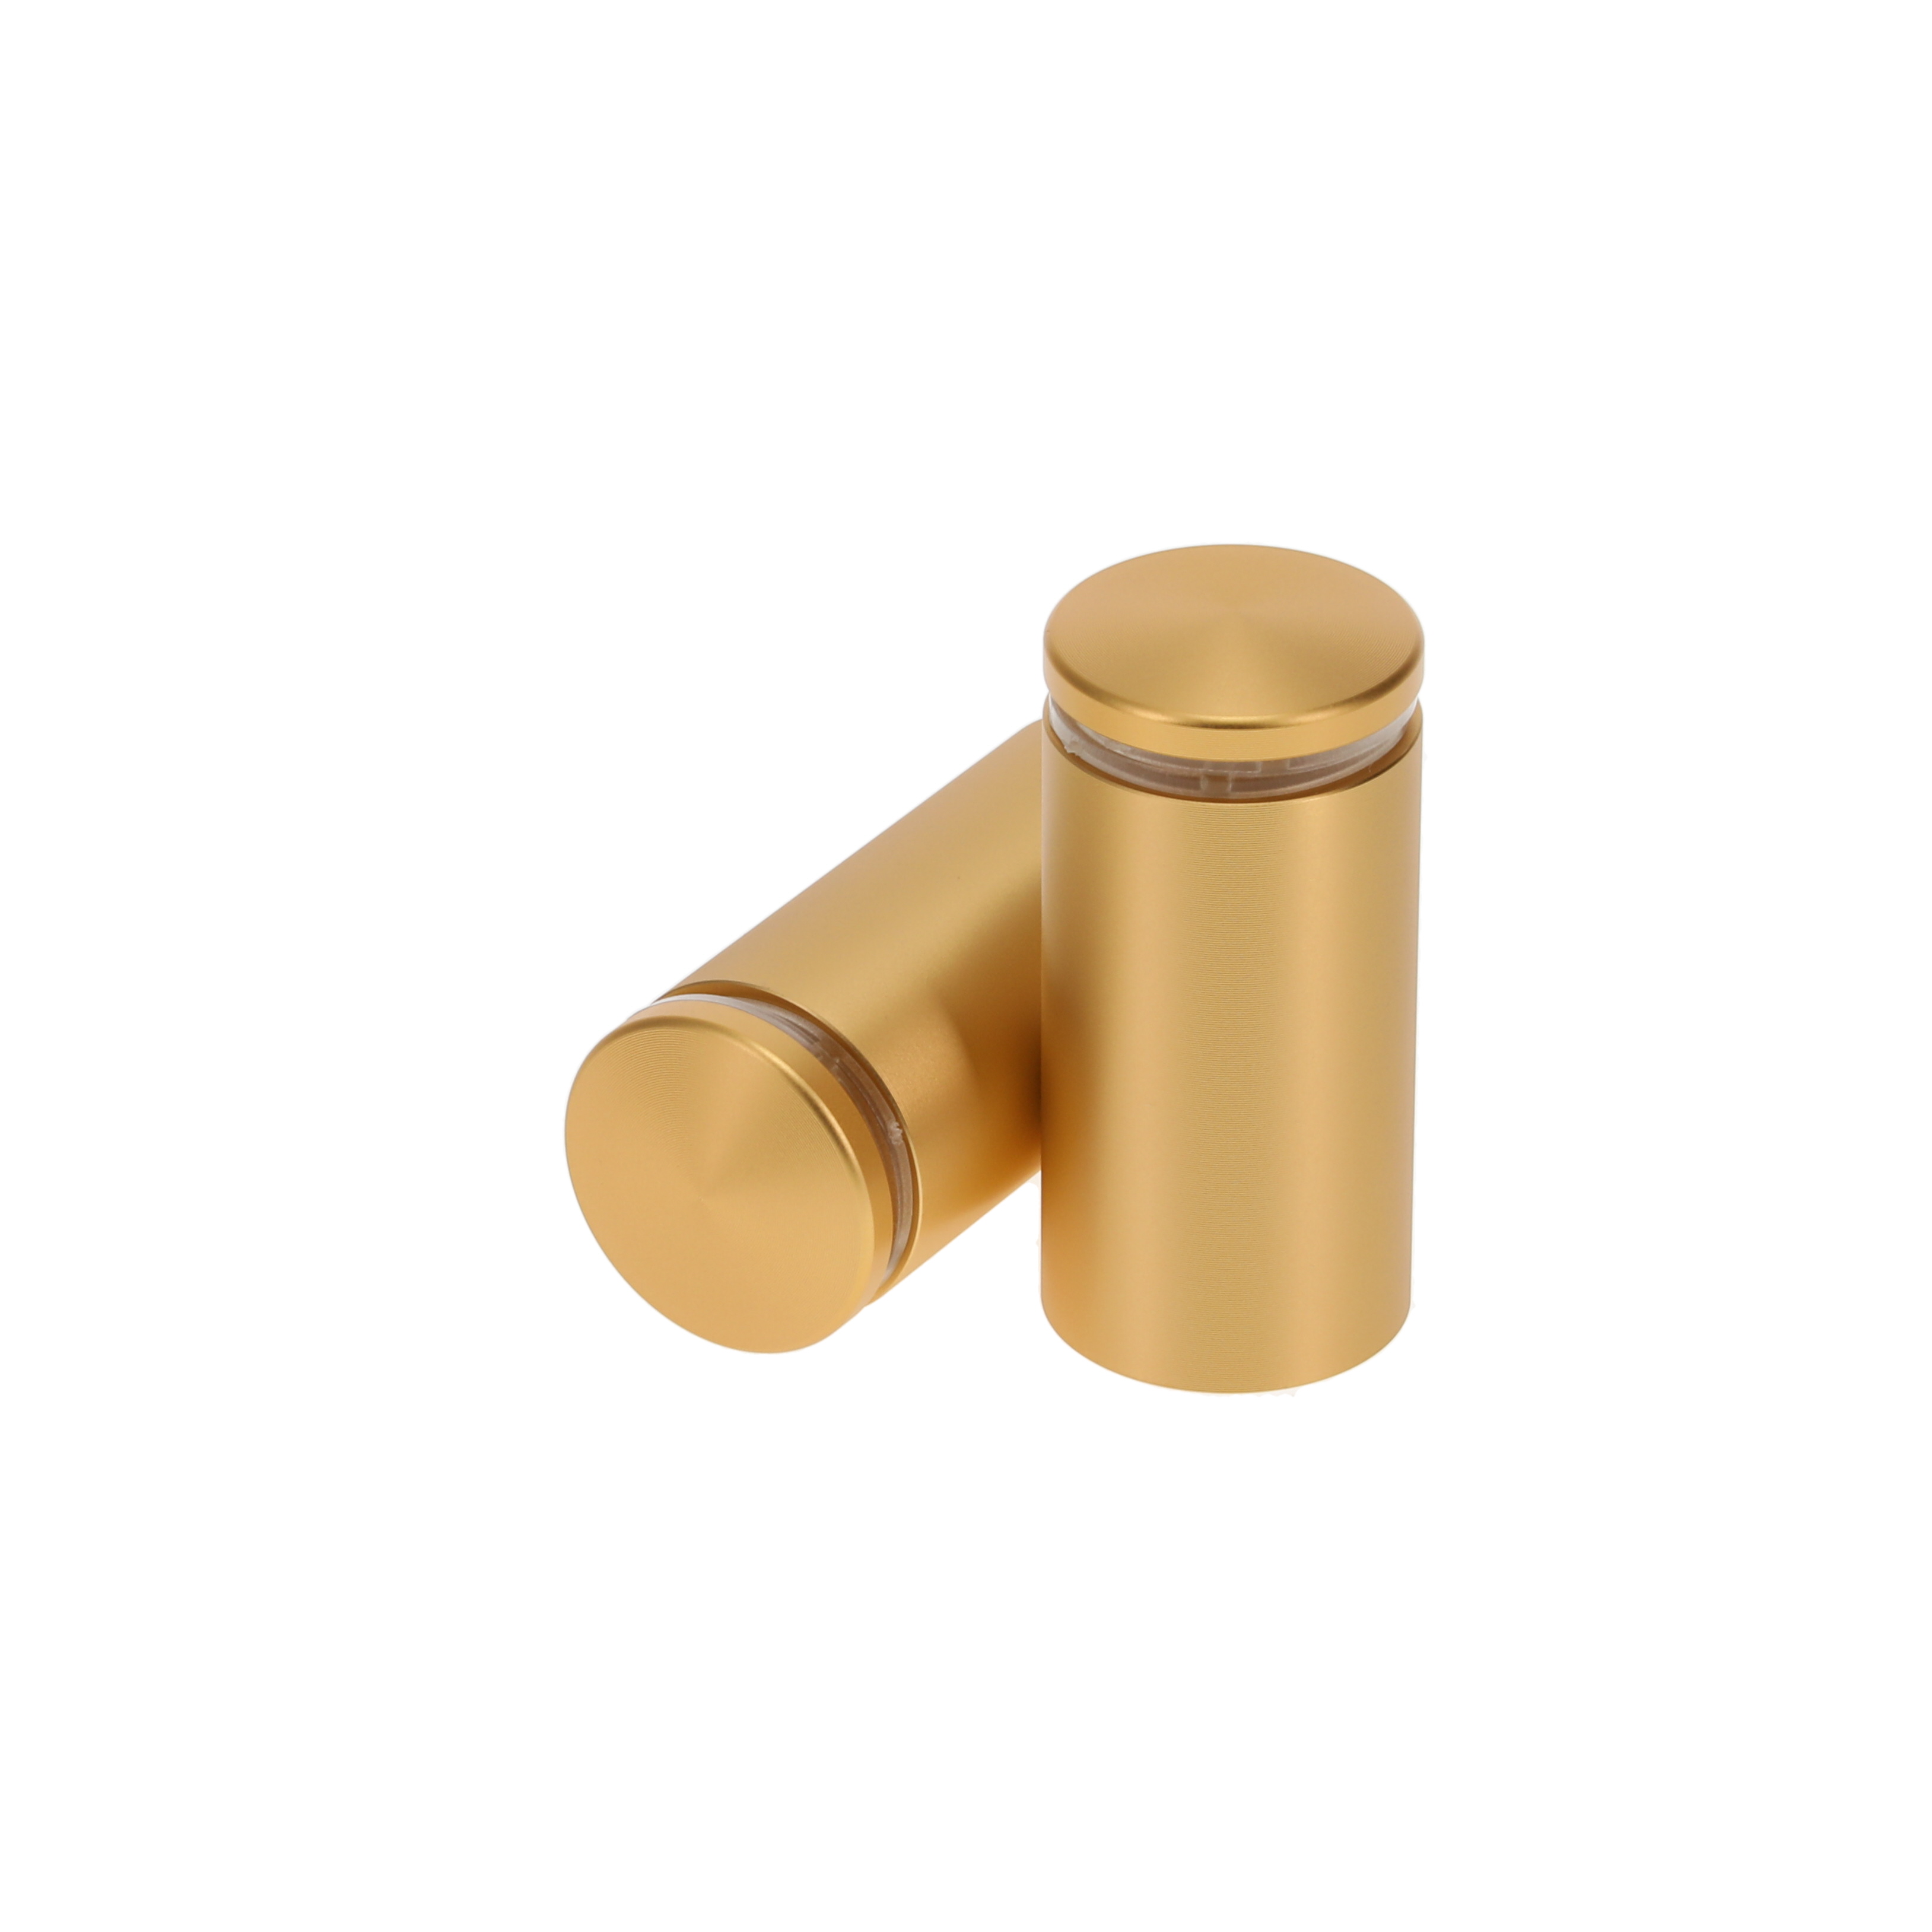 1'' Diameter X 1-3/4 Barrel Length, Aluminum Rounded Head Standoffs, Matte Champagne Anodized Finish Easy Fasten Standoff (For Inside / Outside use) [Required Material Hole Size: 7/16'']